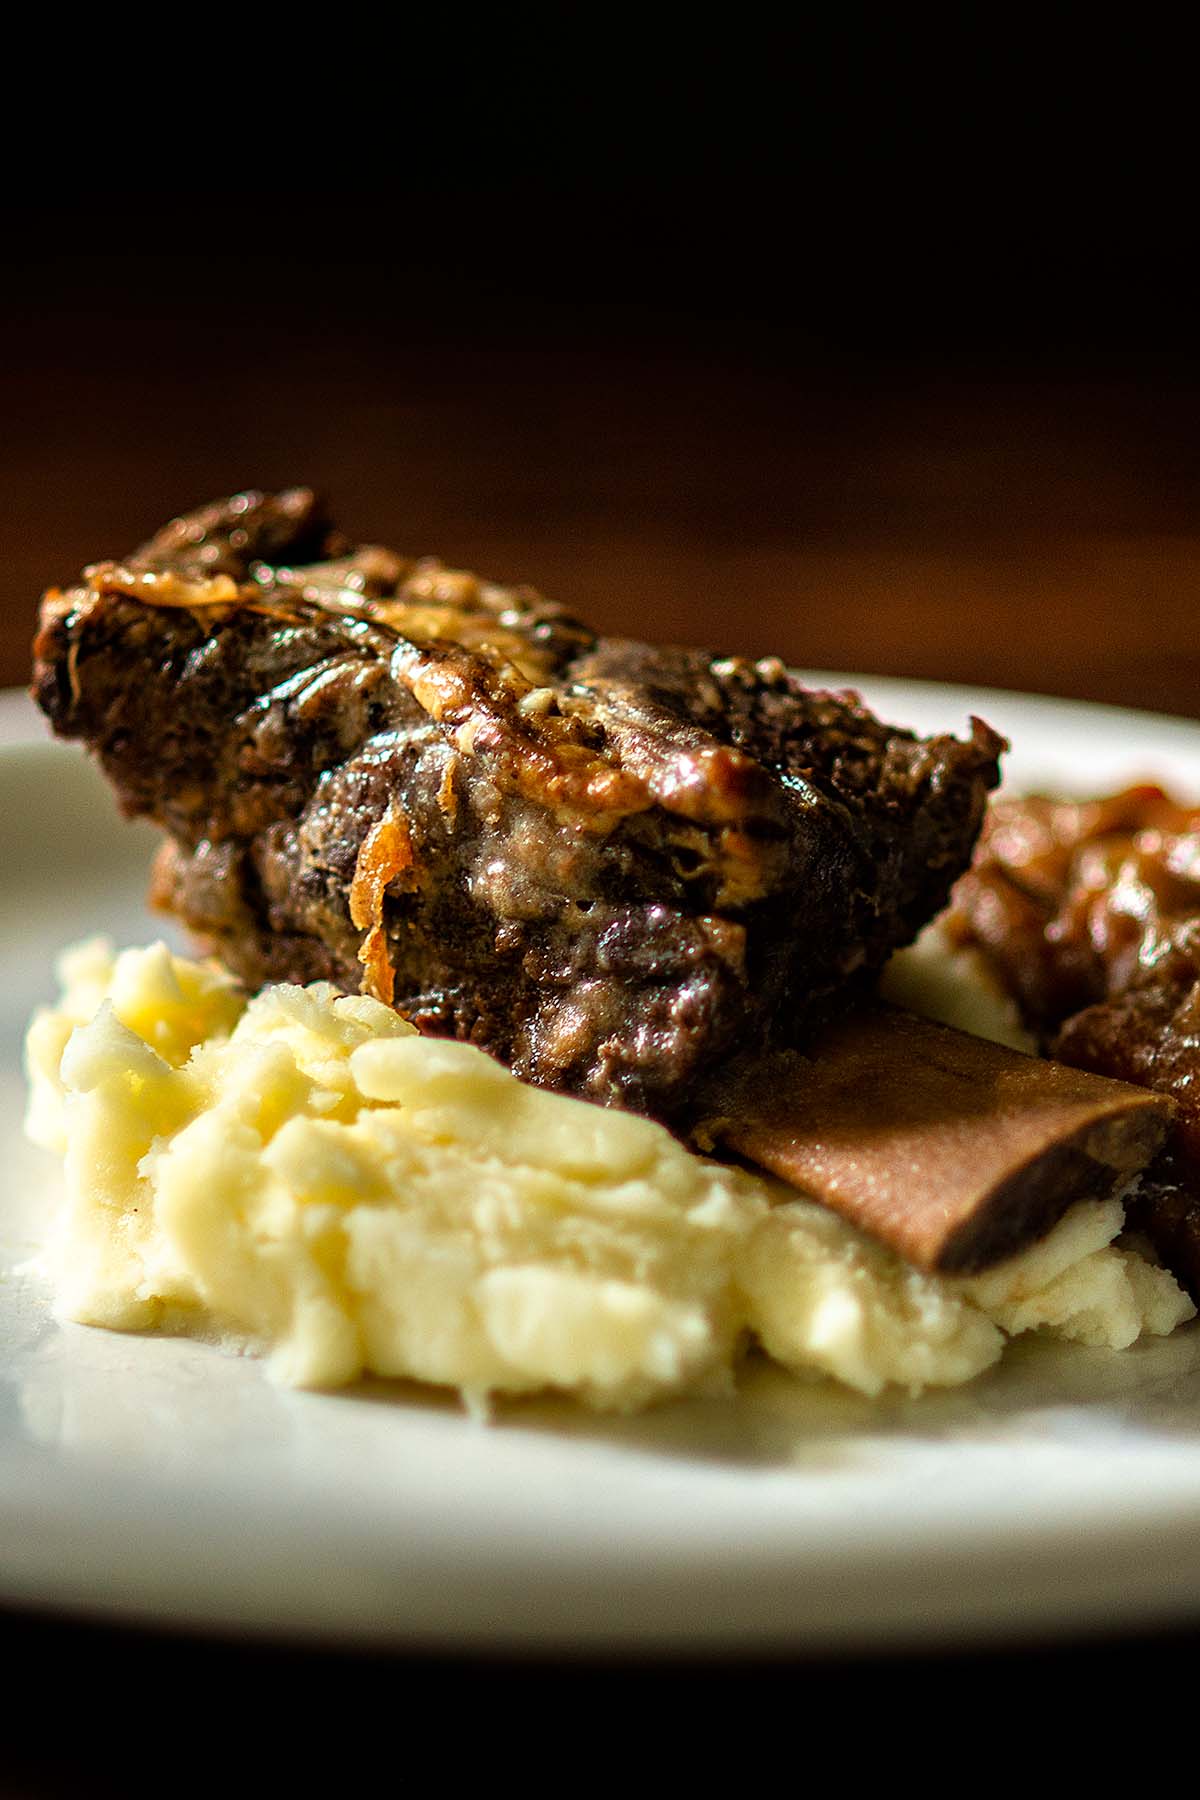 Beef Short Rib served over mashed potatoes.